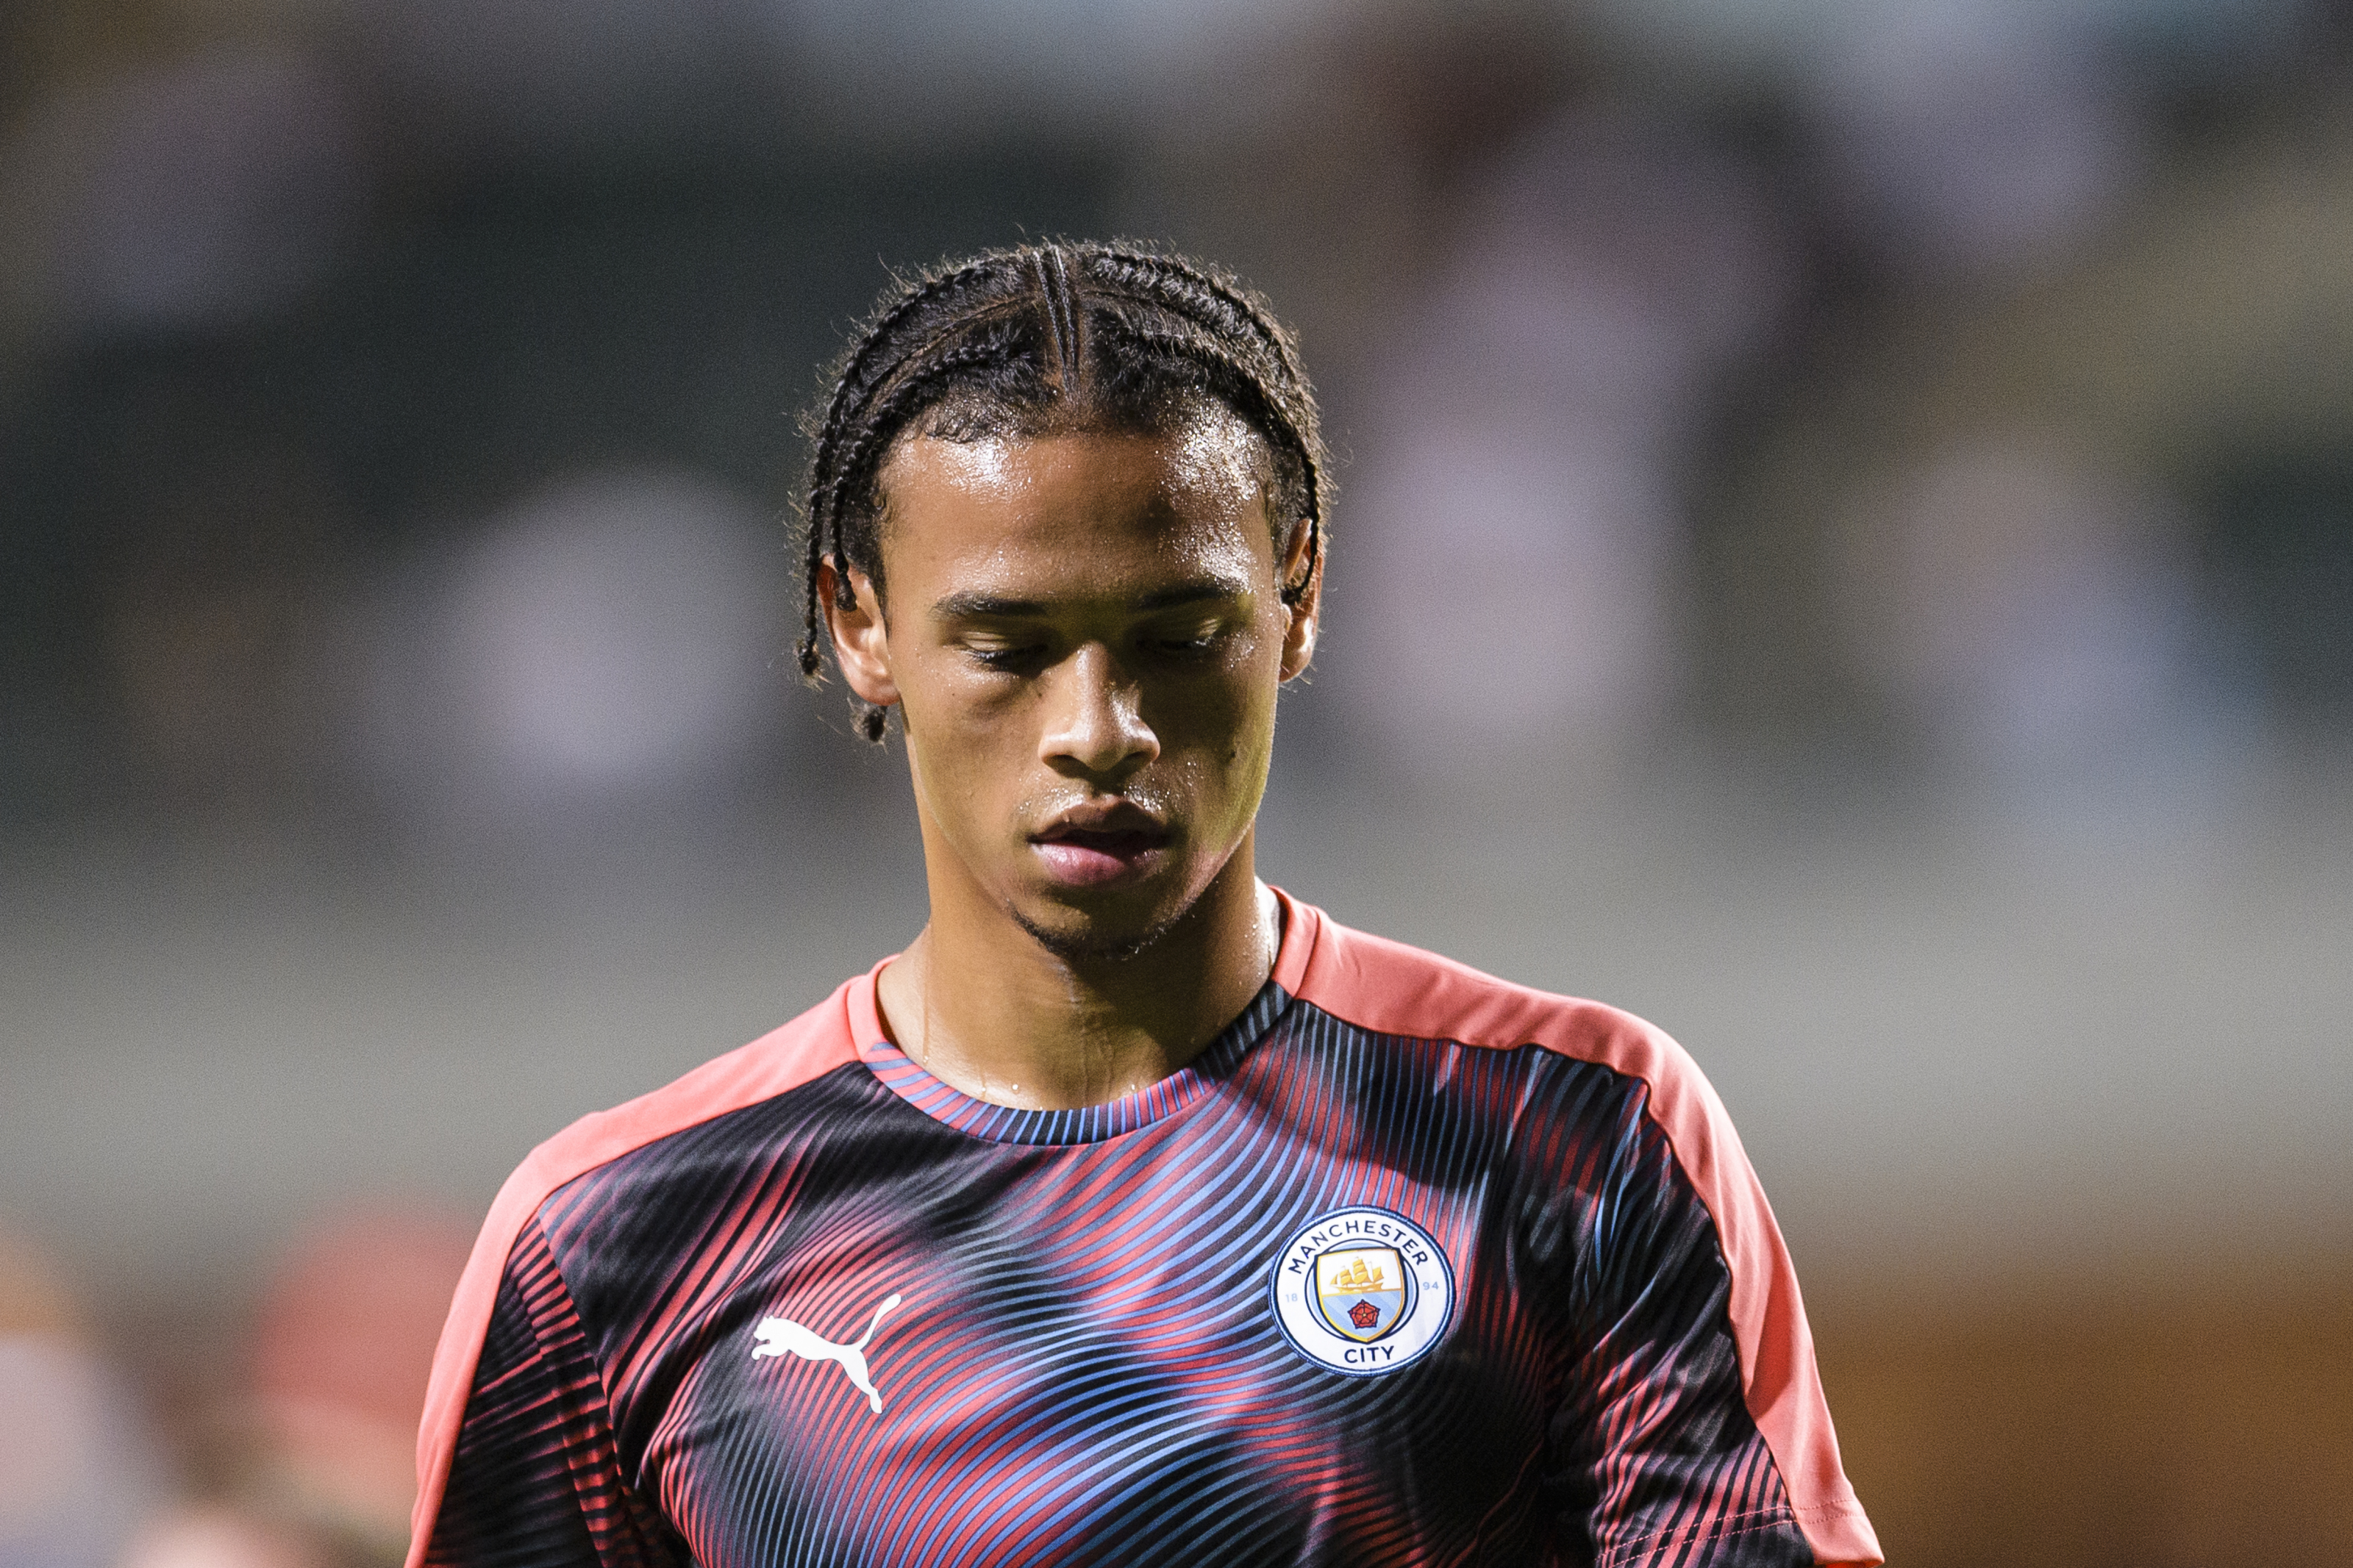 Leroy Sane: The last thing on the German's mind is a switch to Liverpool